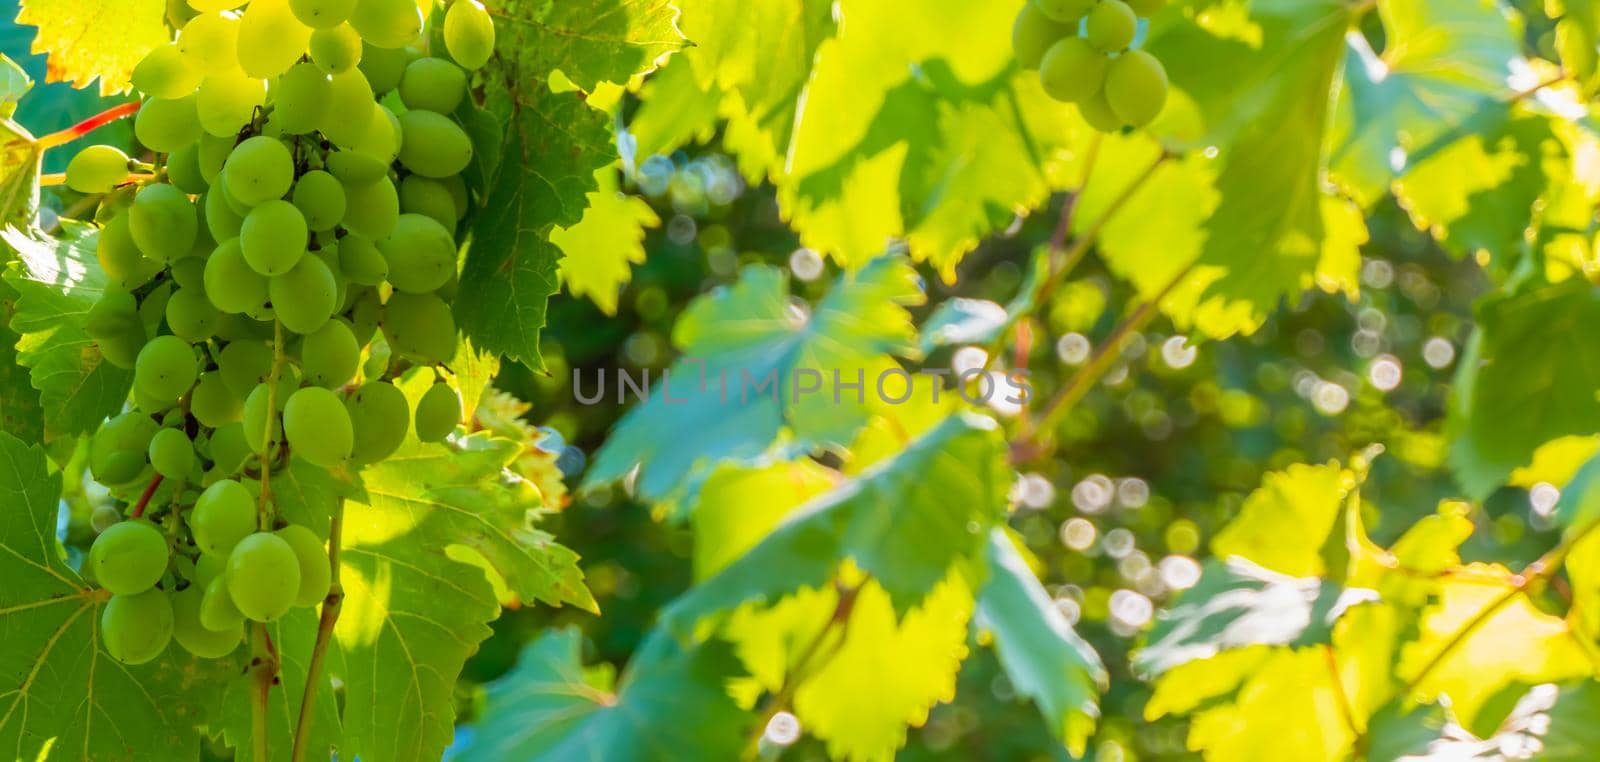 Ripe green grape in vineyard. Grapes green taste sweet growing natural. Green grape on the vine in garden. High quality photo